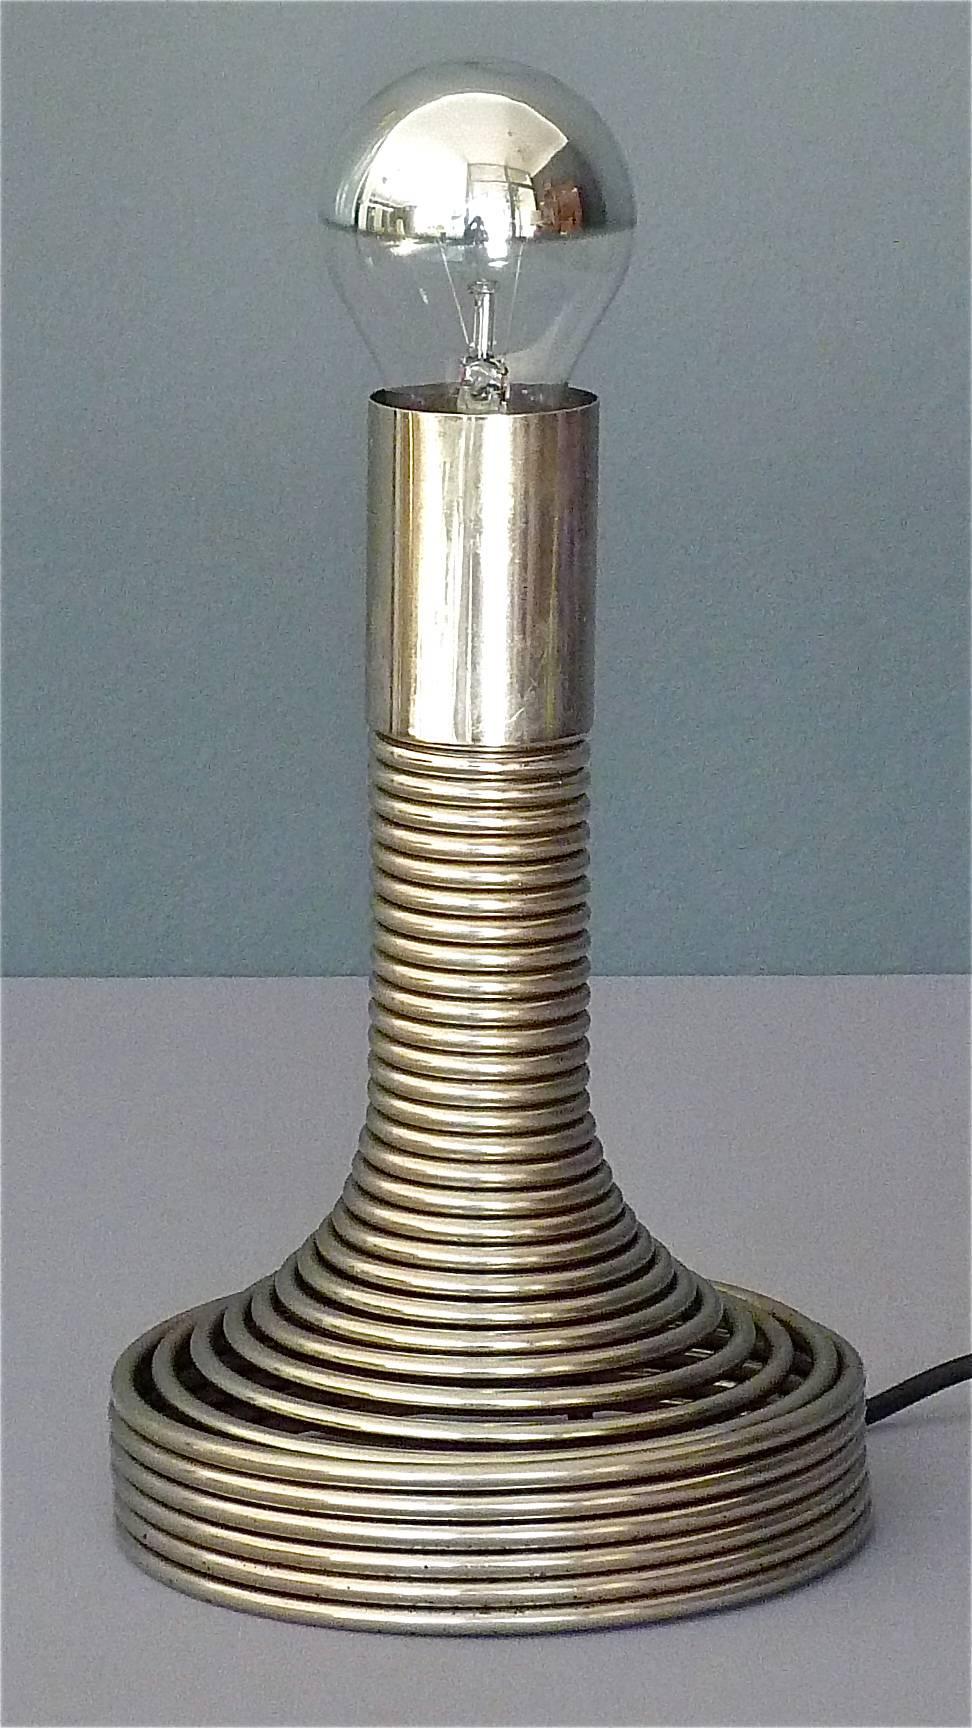 Fabulous “Spirale” table lamp designed by Angelo Mangiarotti, Italy circa 1970 and manufactured by Candle, ( follower of Fontana Arte ), Milano. The “Spiral” table light is made of a chromed steel spring with a hidden and integrated switch inside